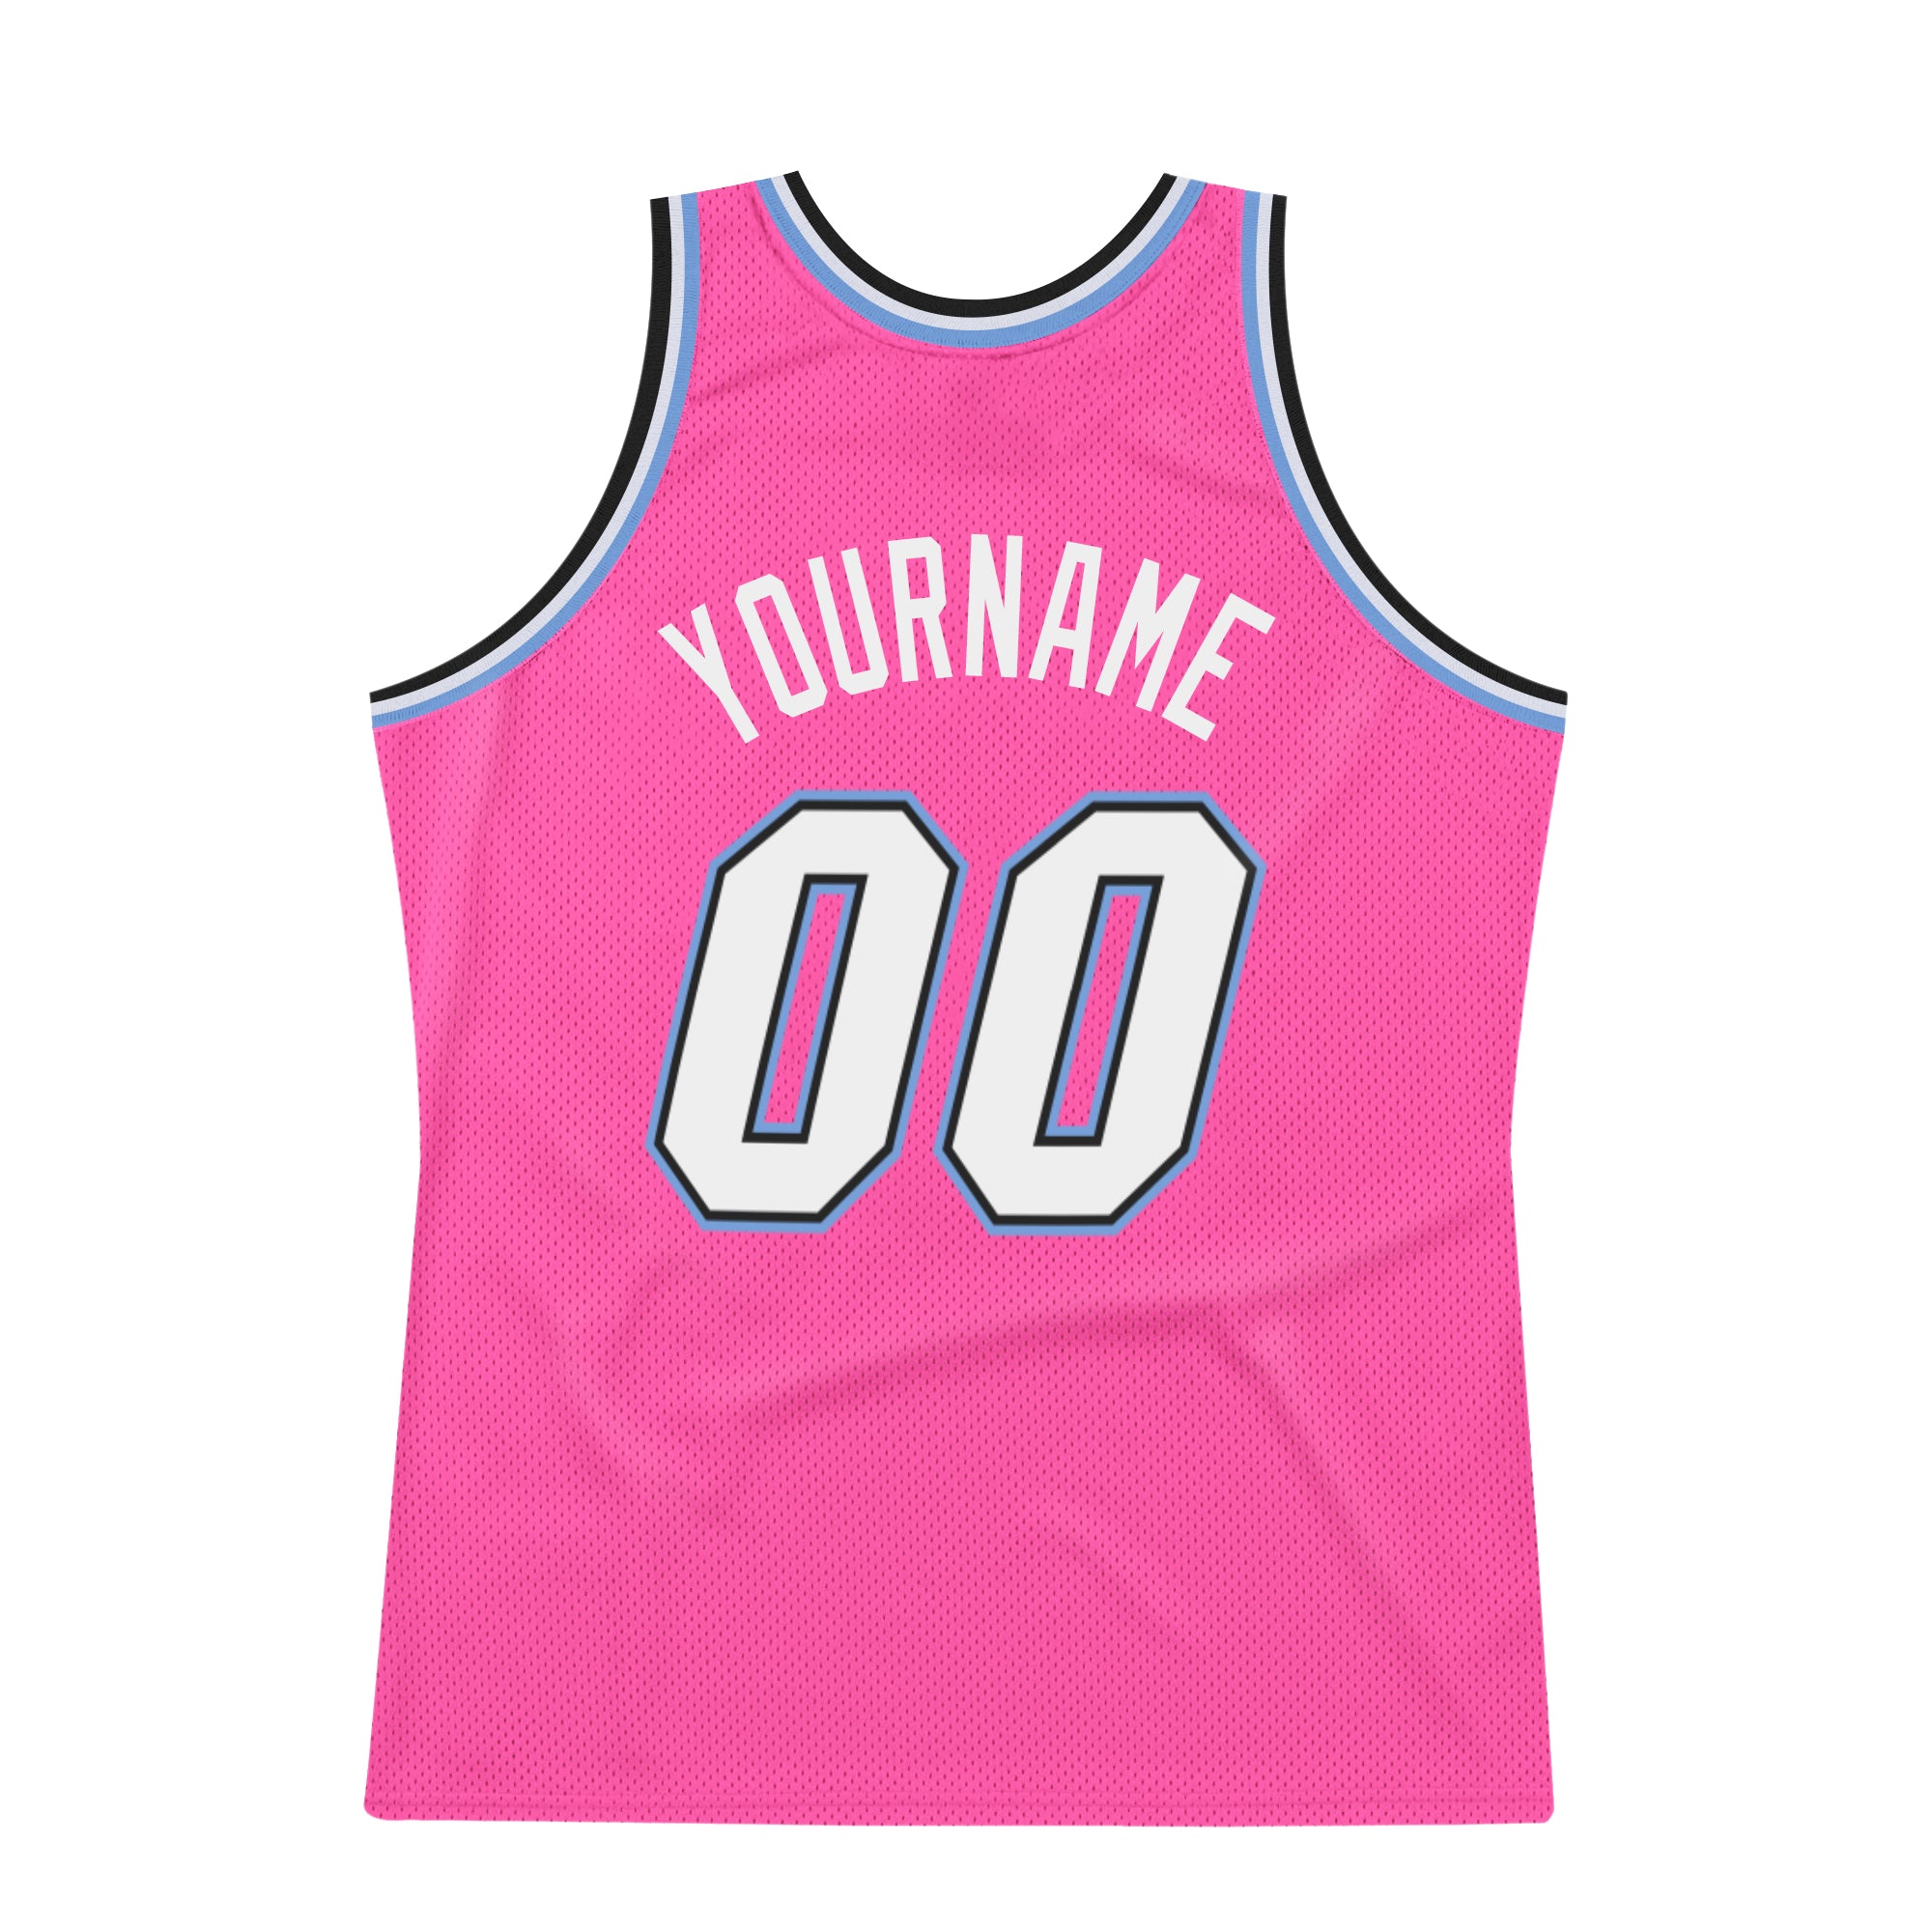 Custom Light Pink Green-White Authentic Throwback Basketball